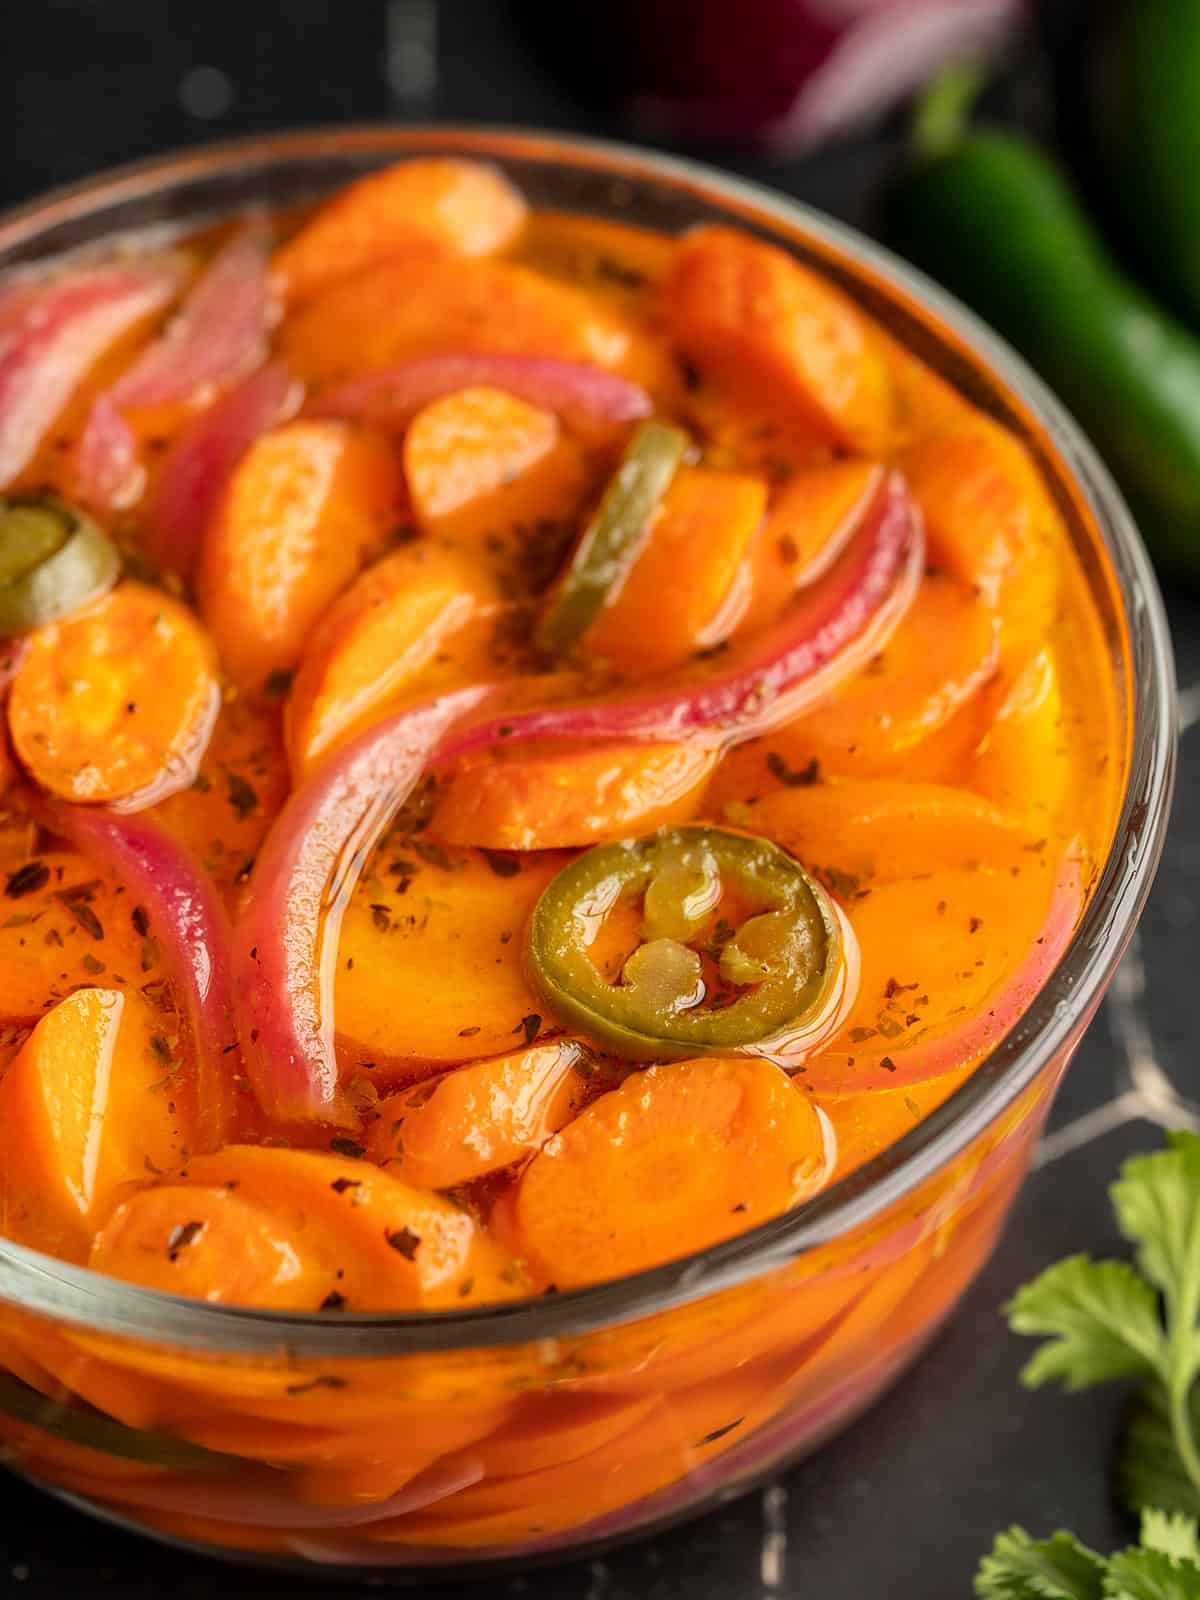 Side view of a glass bowl full of spicy carrots.